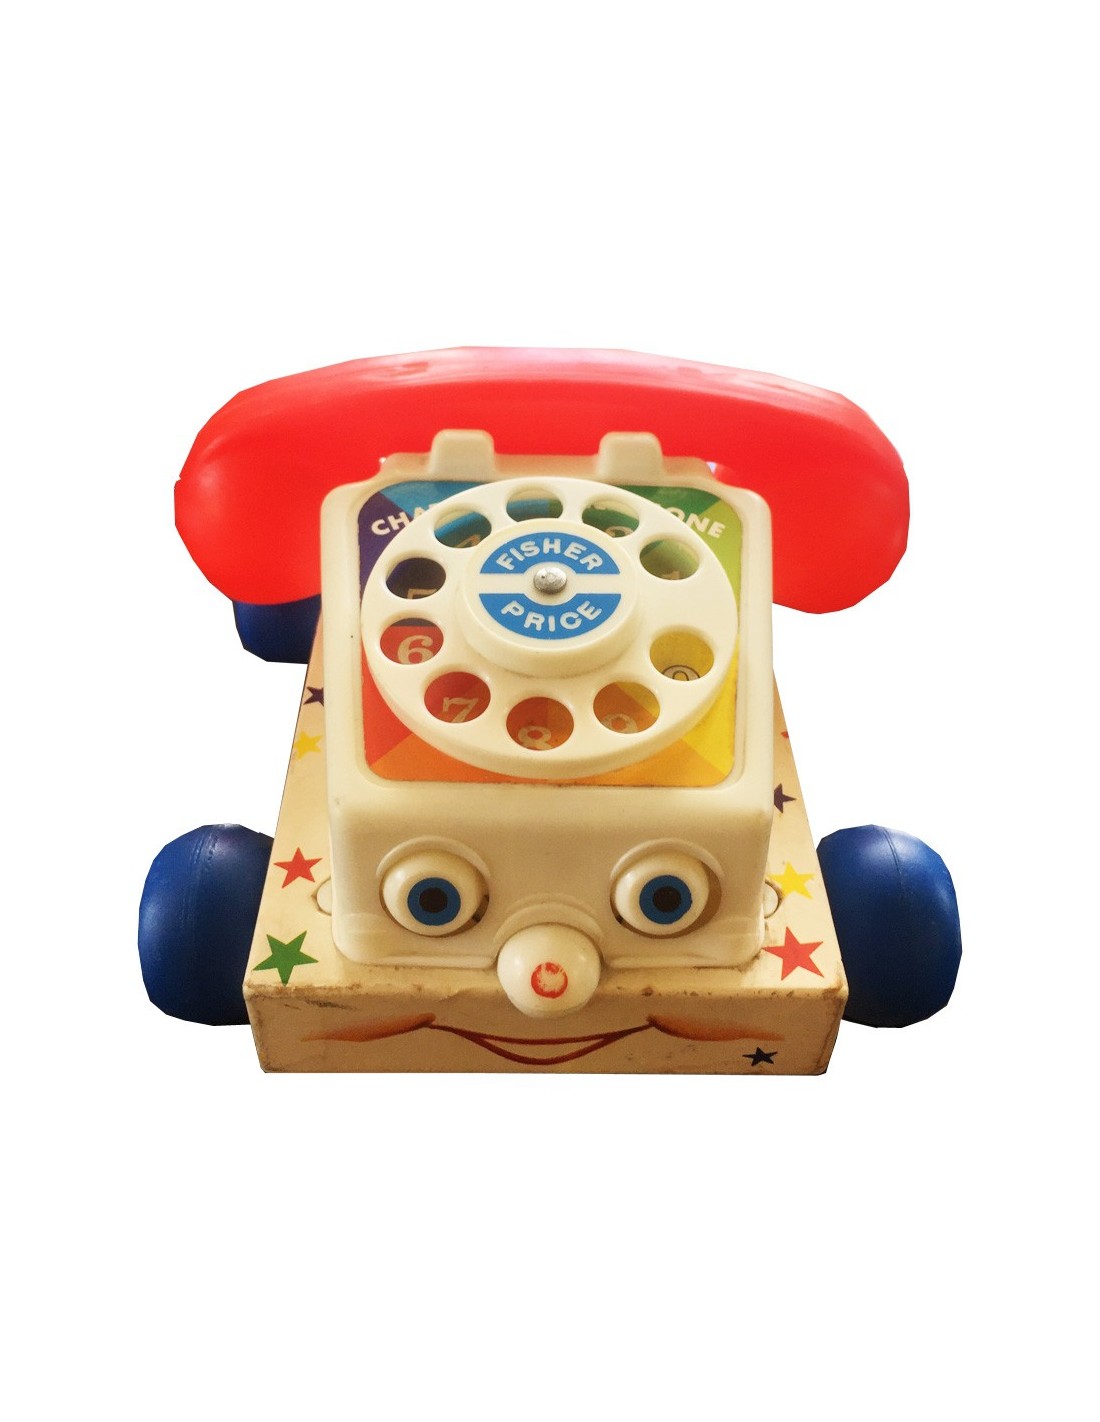 jouet-vintage-telephone-a-tirer-fisher-price-annee-1961-made-in